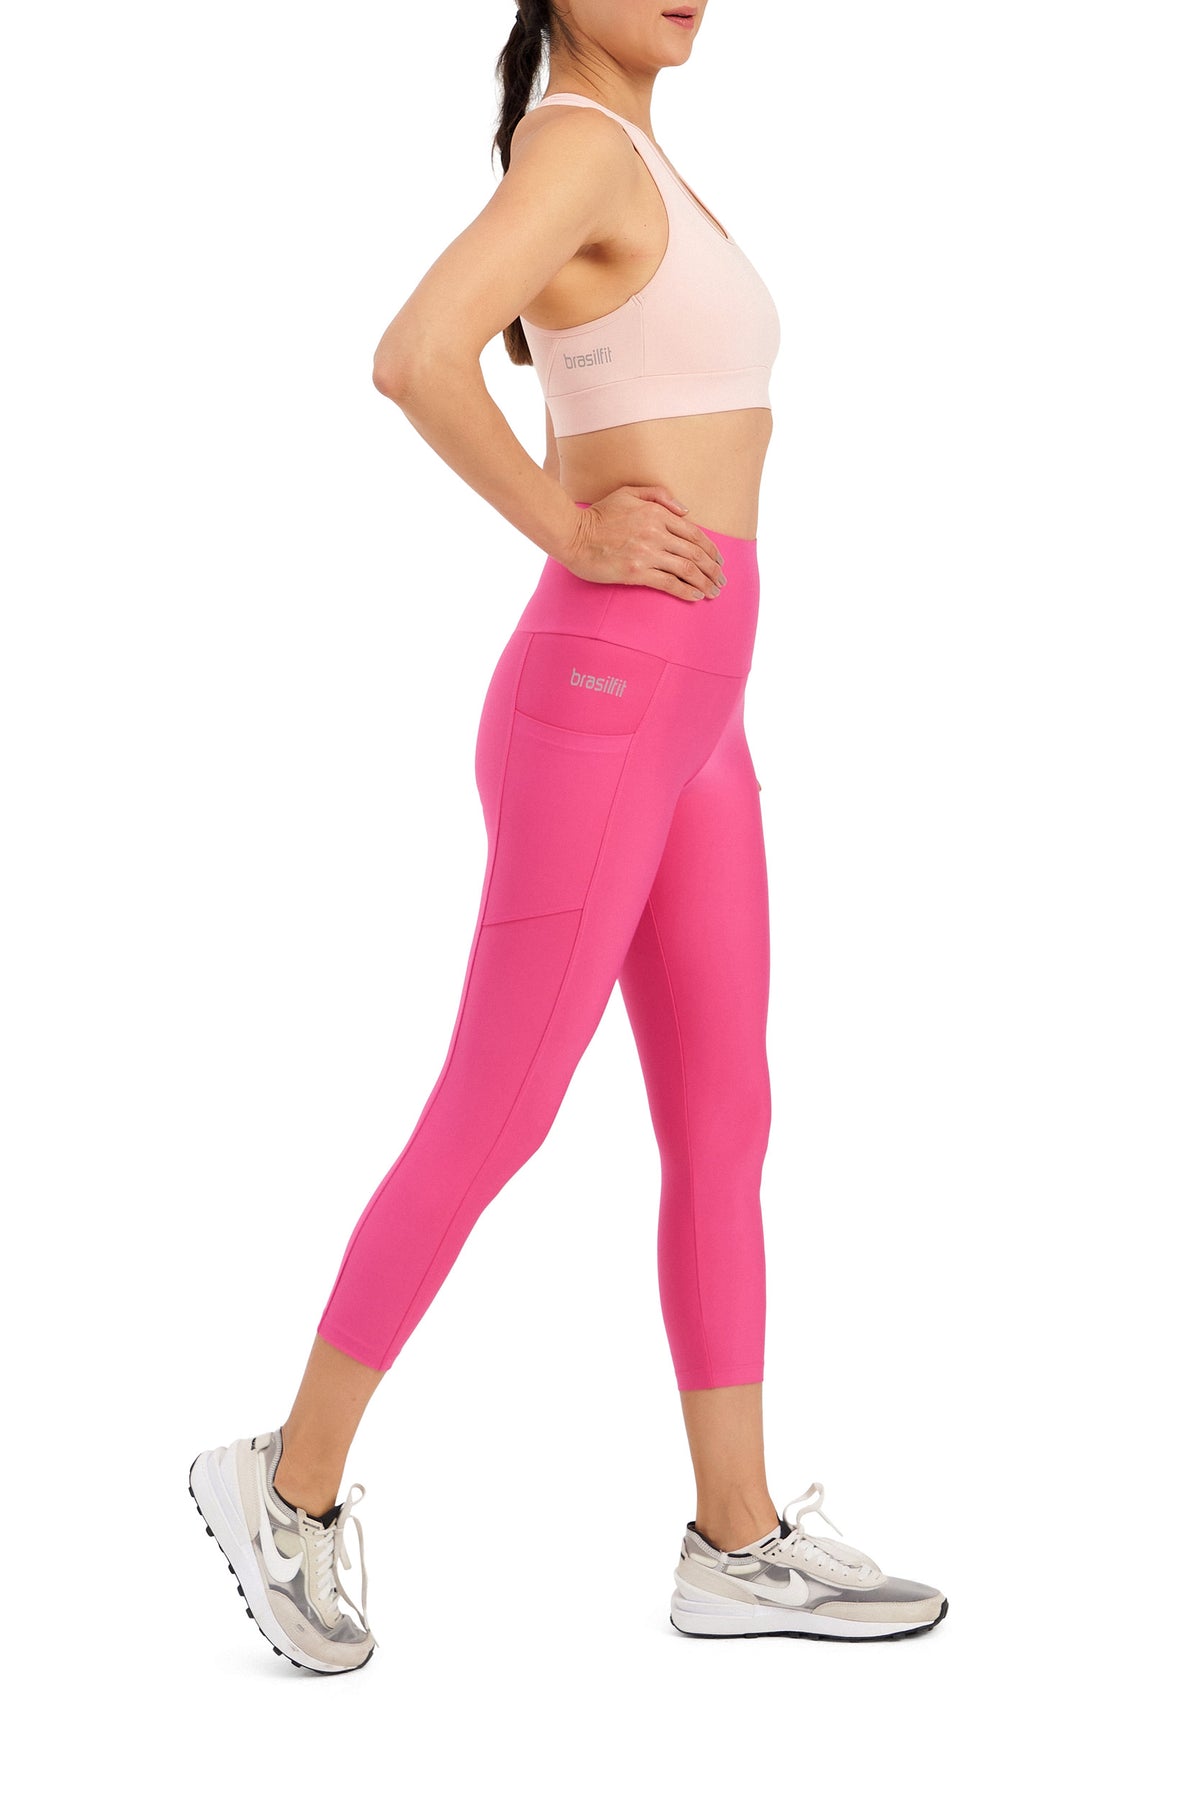 High waisted Mid Calf Leggings with Pockets - High support printed